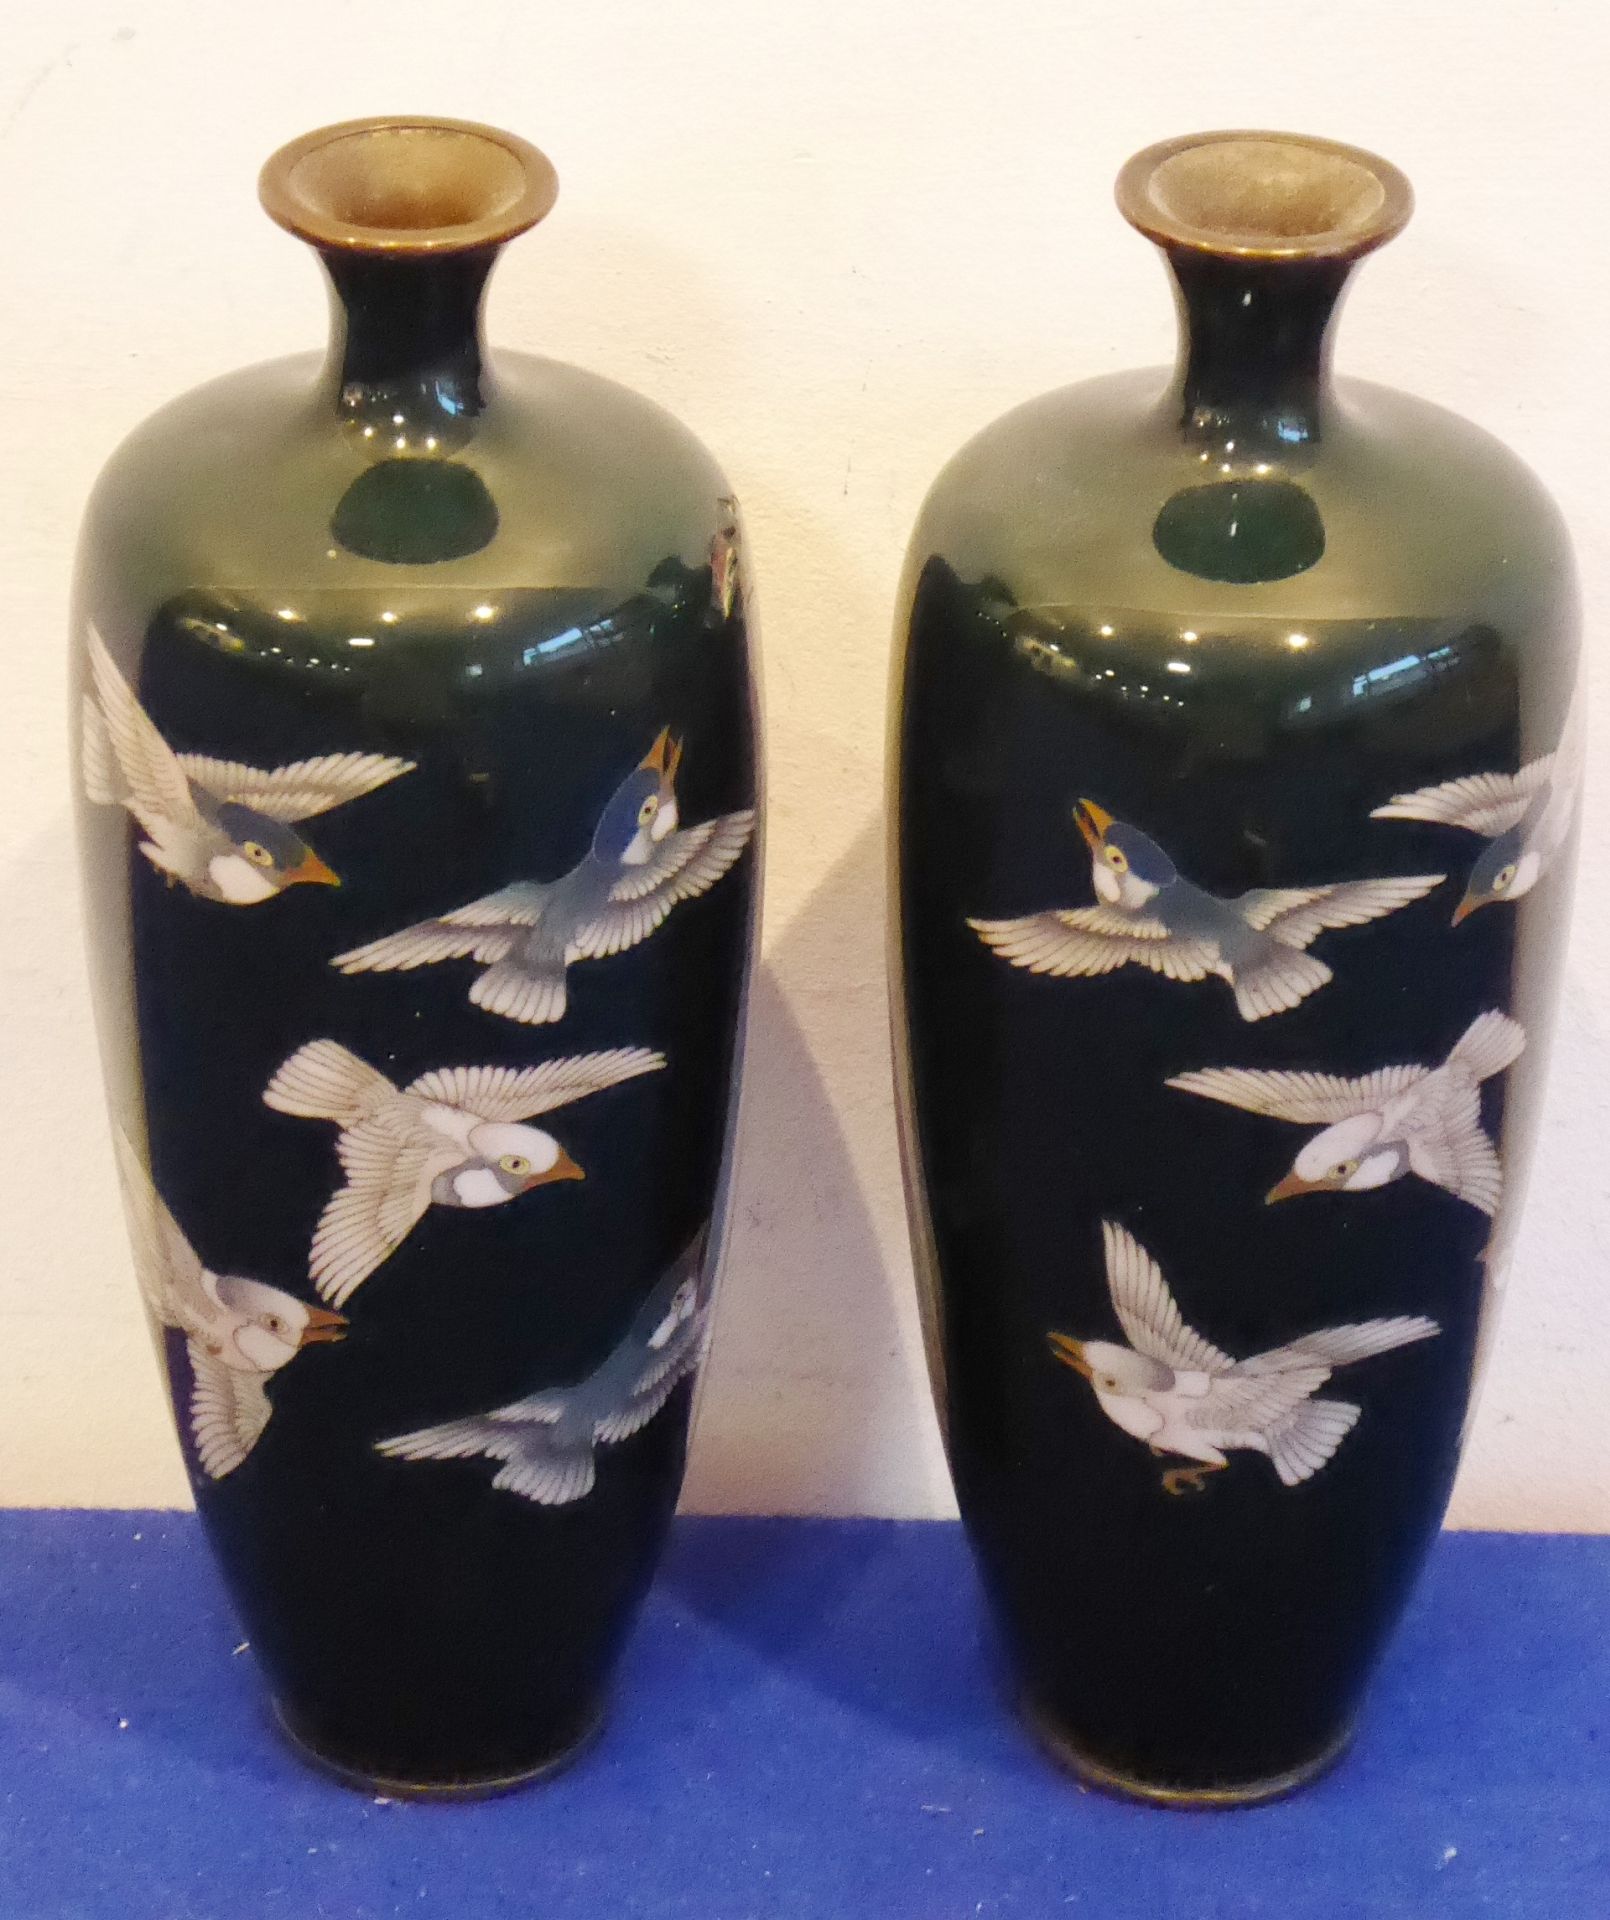 A pair of early 20th century Japanese Meiji period opposing cloisonné vases,